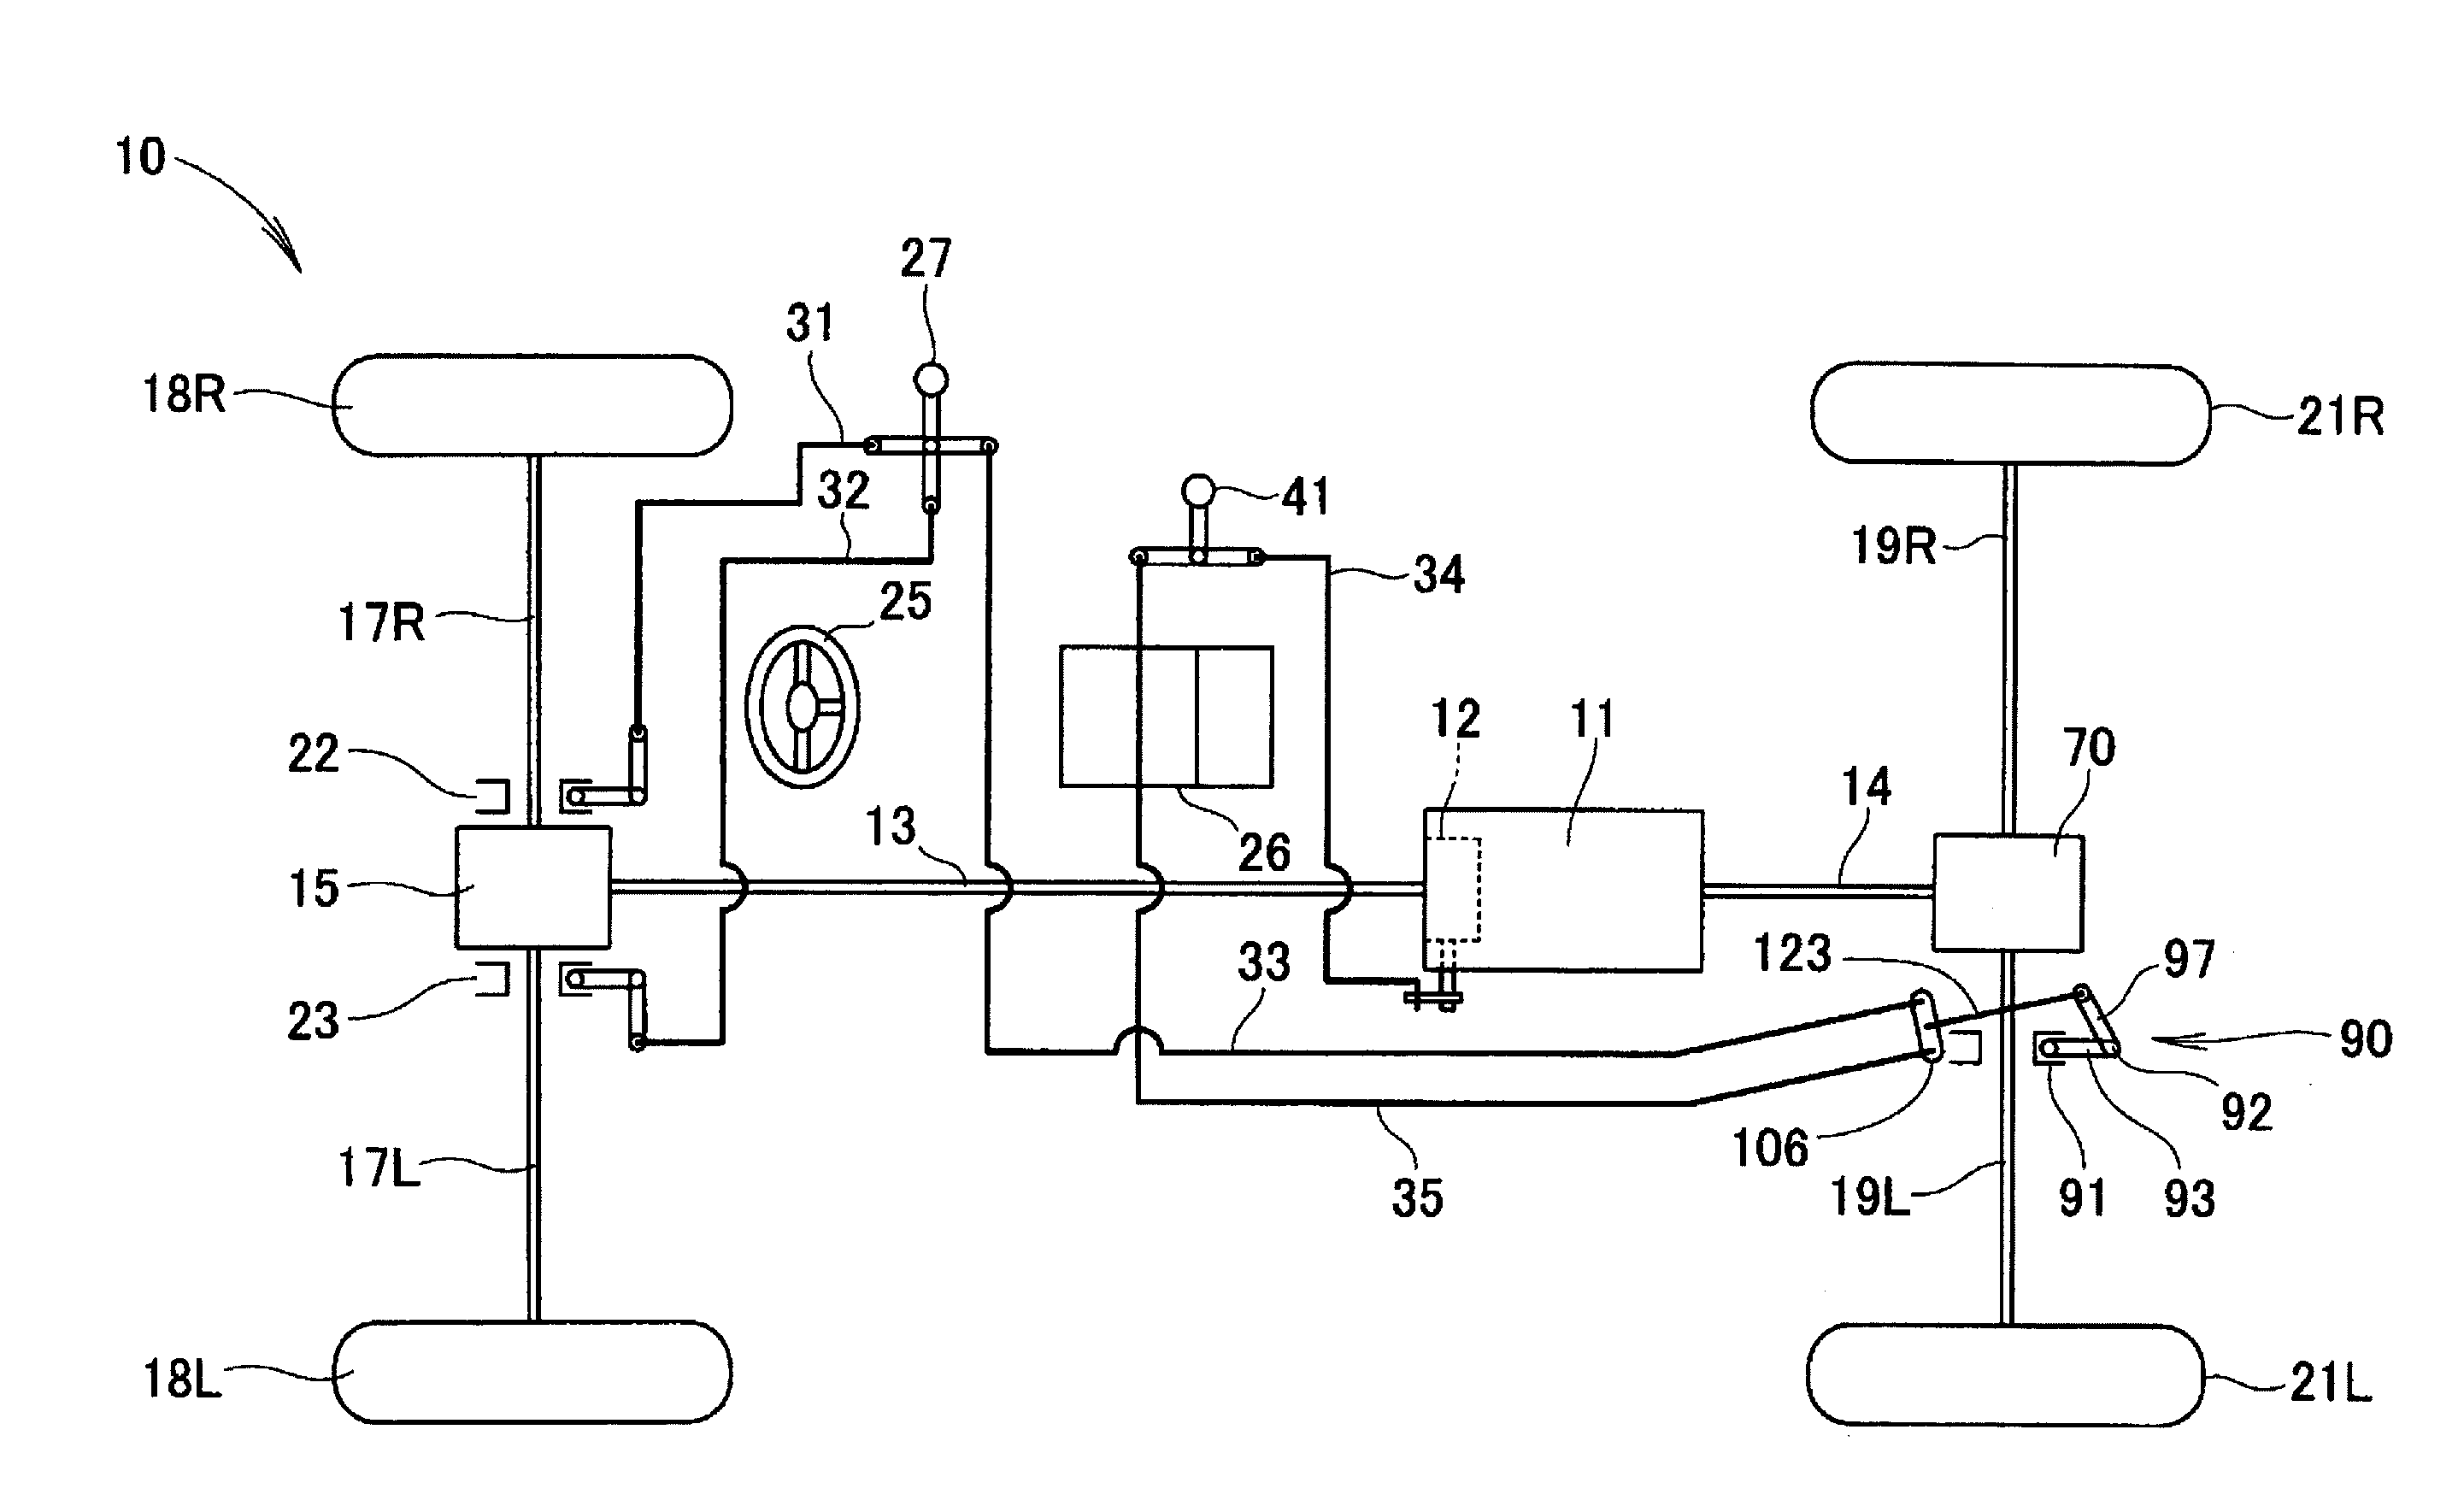 Differential gear provided with differential lock mechanism